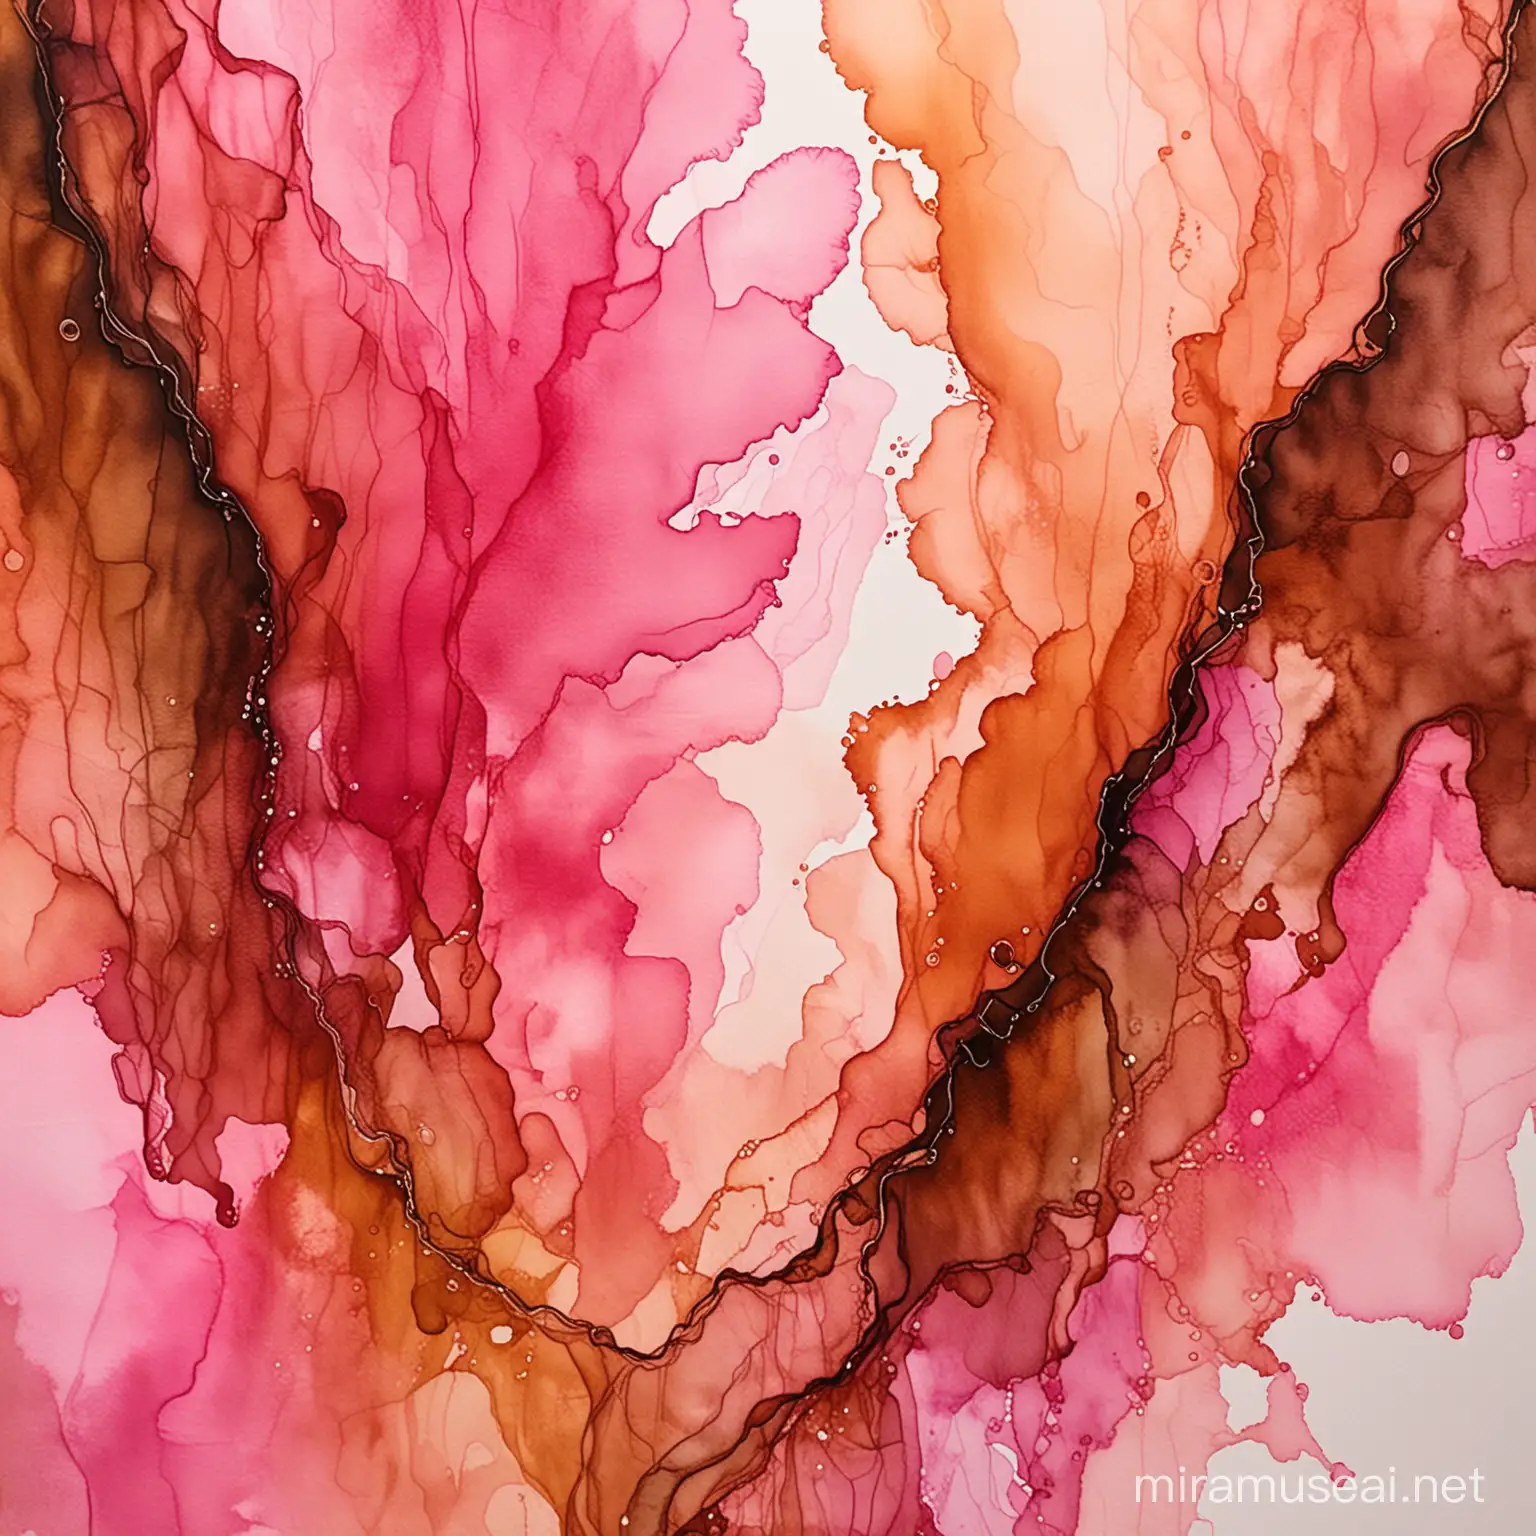 Vibrant Alcohol Ink Abstract Art in Pink Light Pink Brown and Ochre Colors